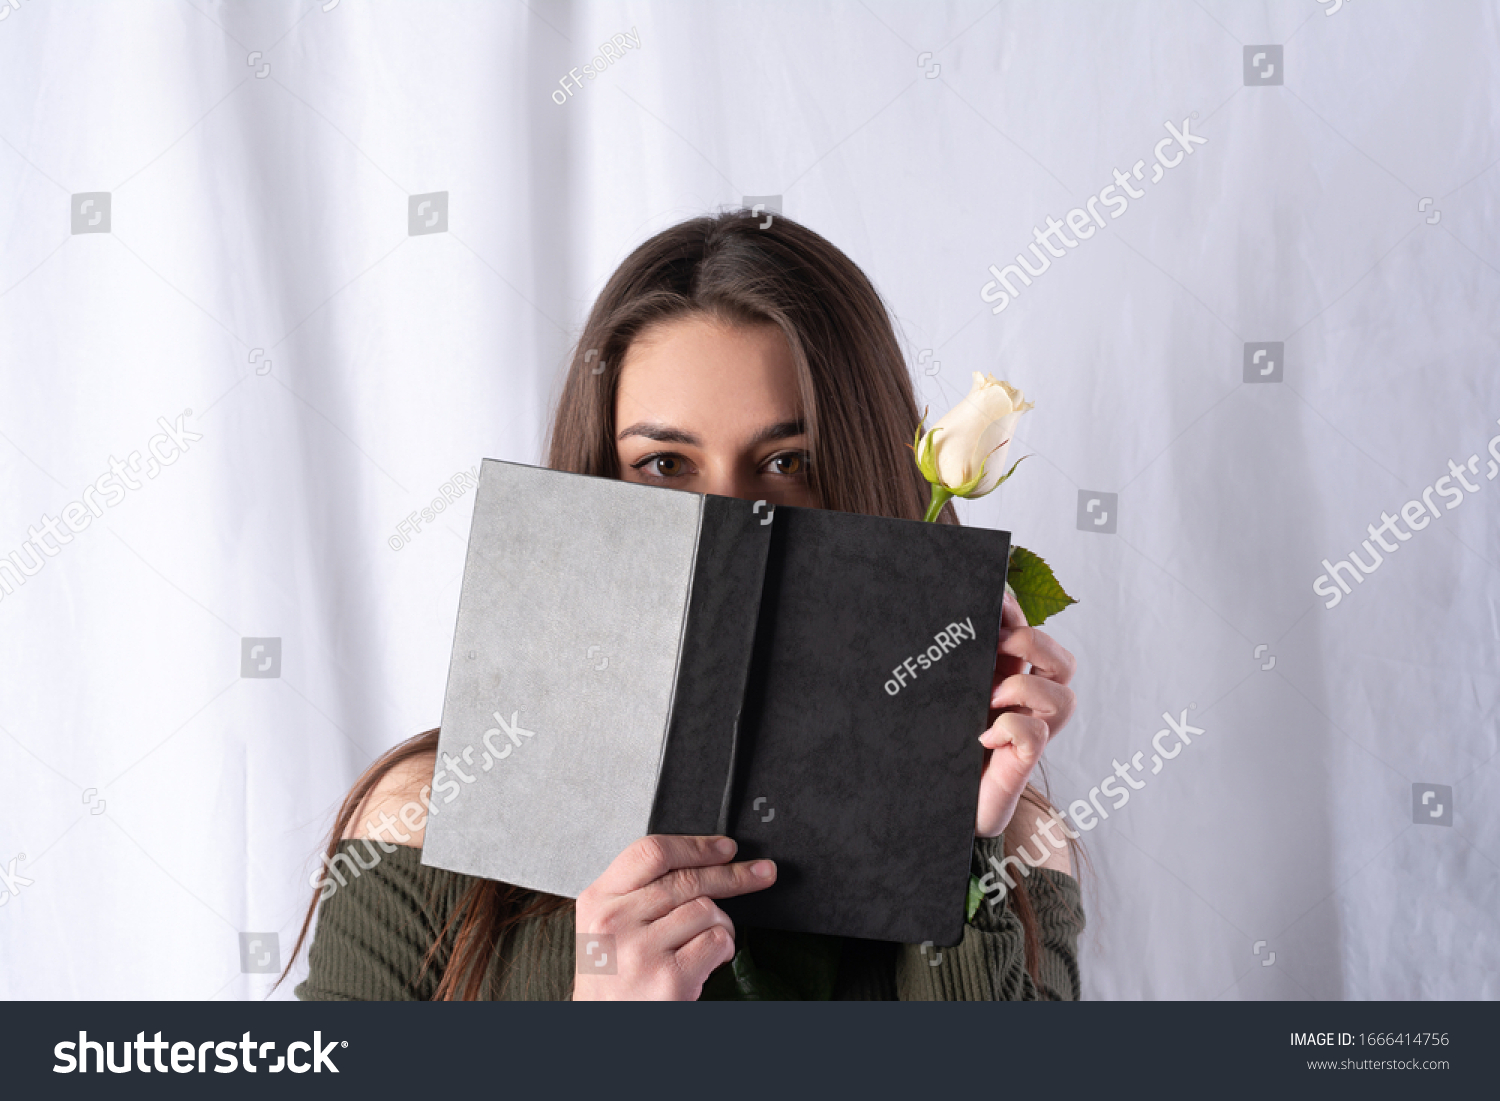 studio portrait of a girl. covered half of her face with a book with a dark cover. a white rose is seen from the book. concept art of intrigue and interest. fabric white fo
 #1666414756